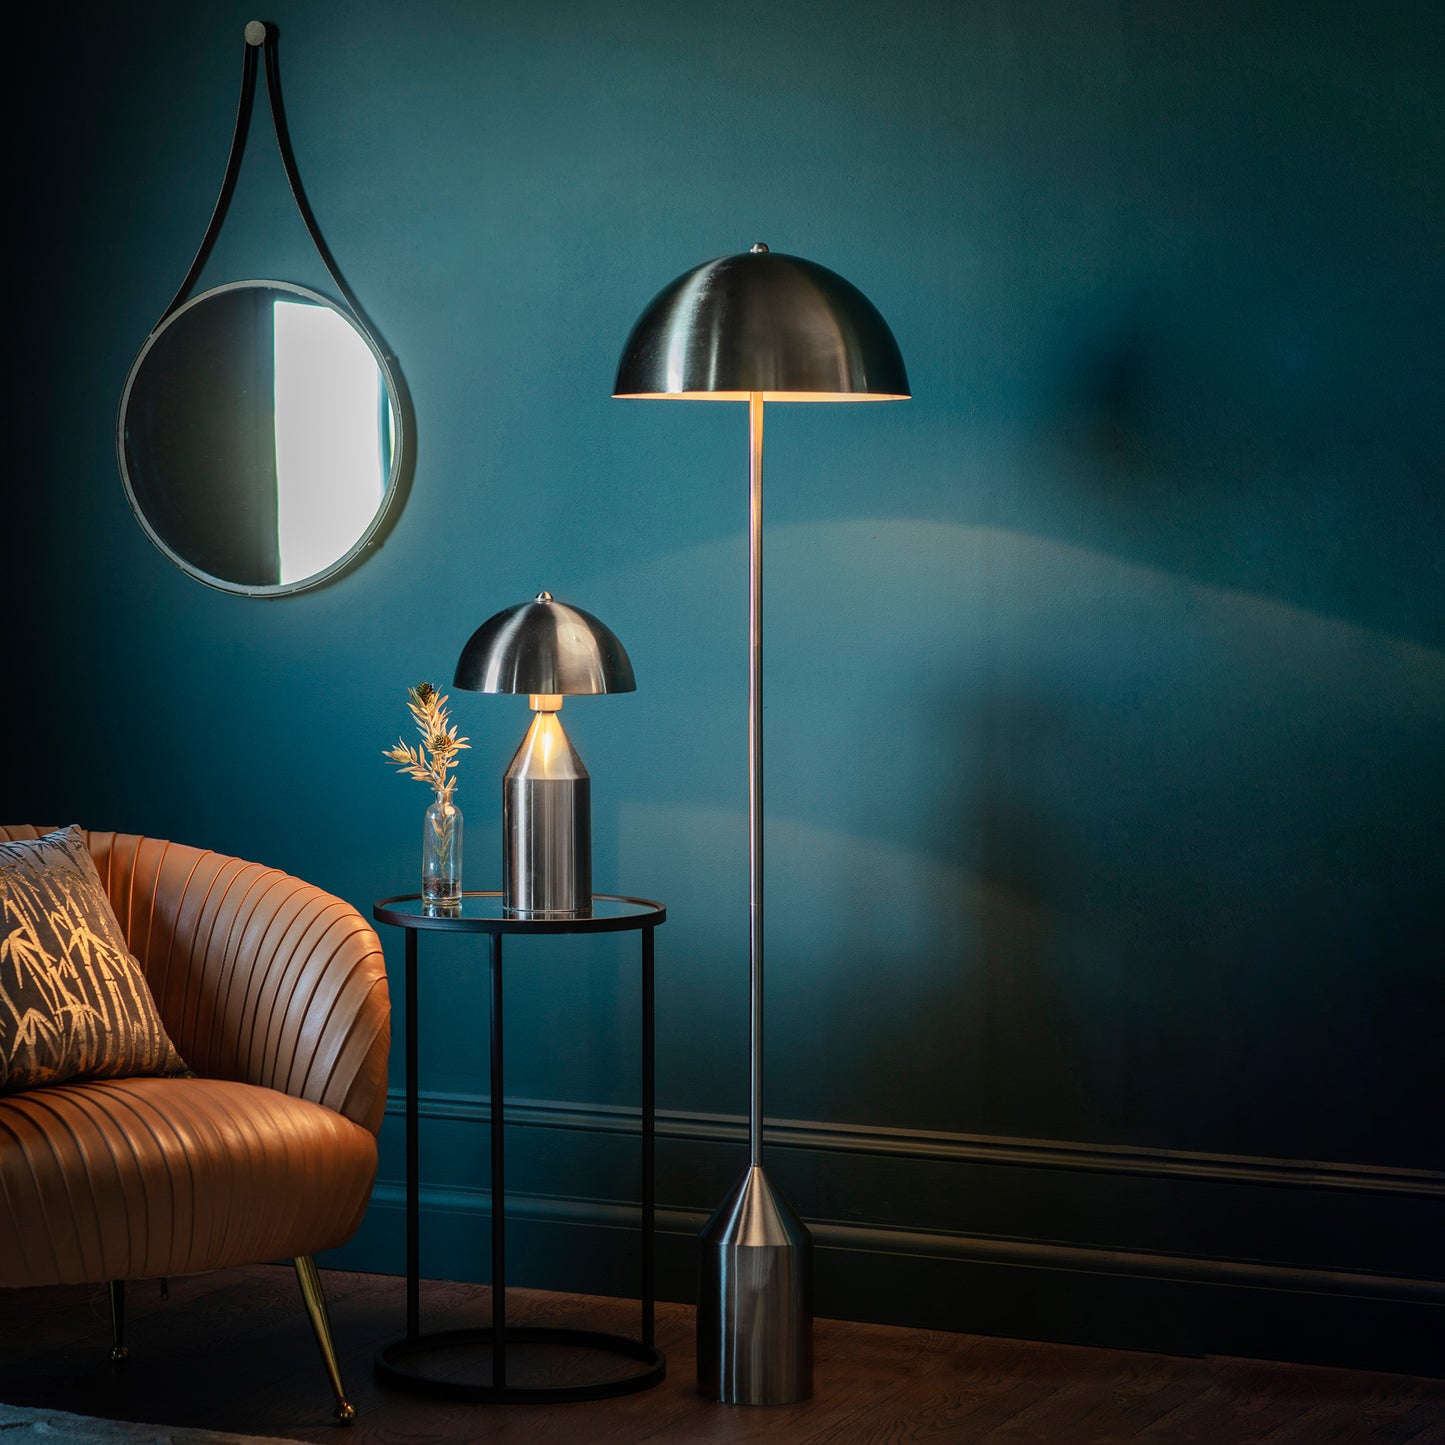 An interior decor room featuring a Nova Floor Lamp and mirror from Kikiathome.co.uk.